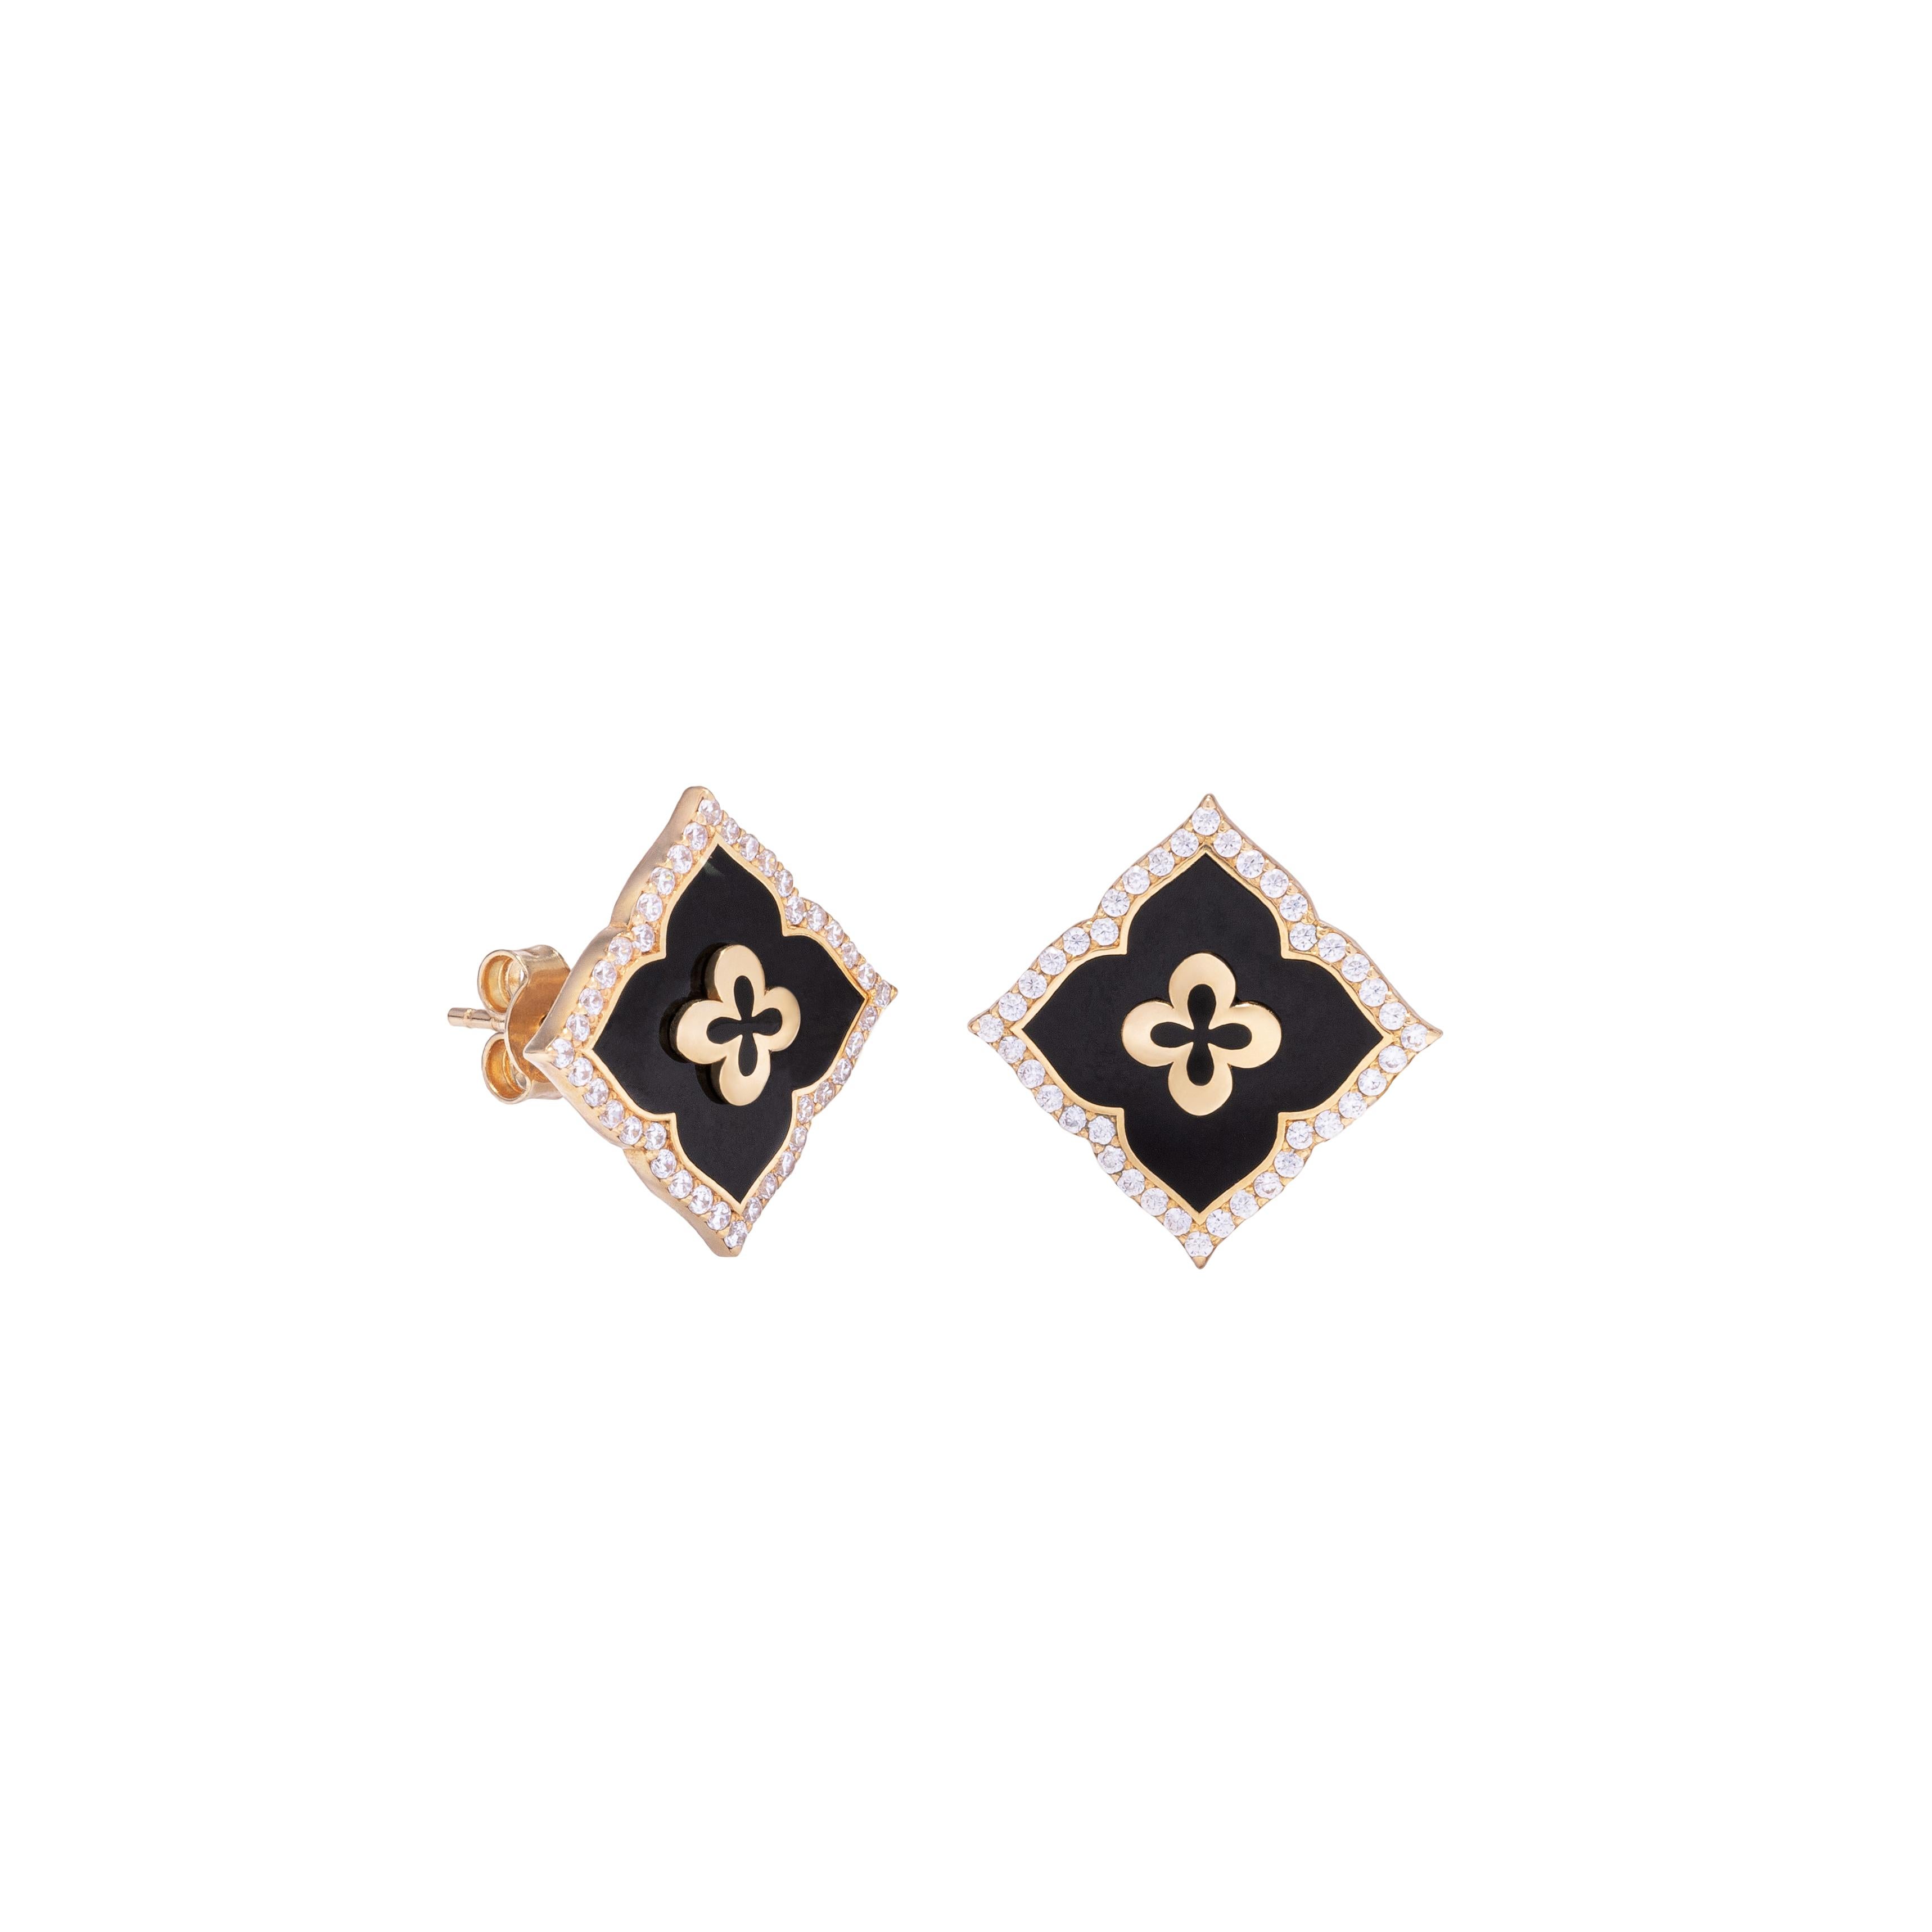 Contemporary Solid Gold Diamond Stud Earrings with Black Fire Enamel Detailing For Sale